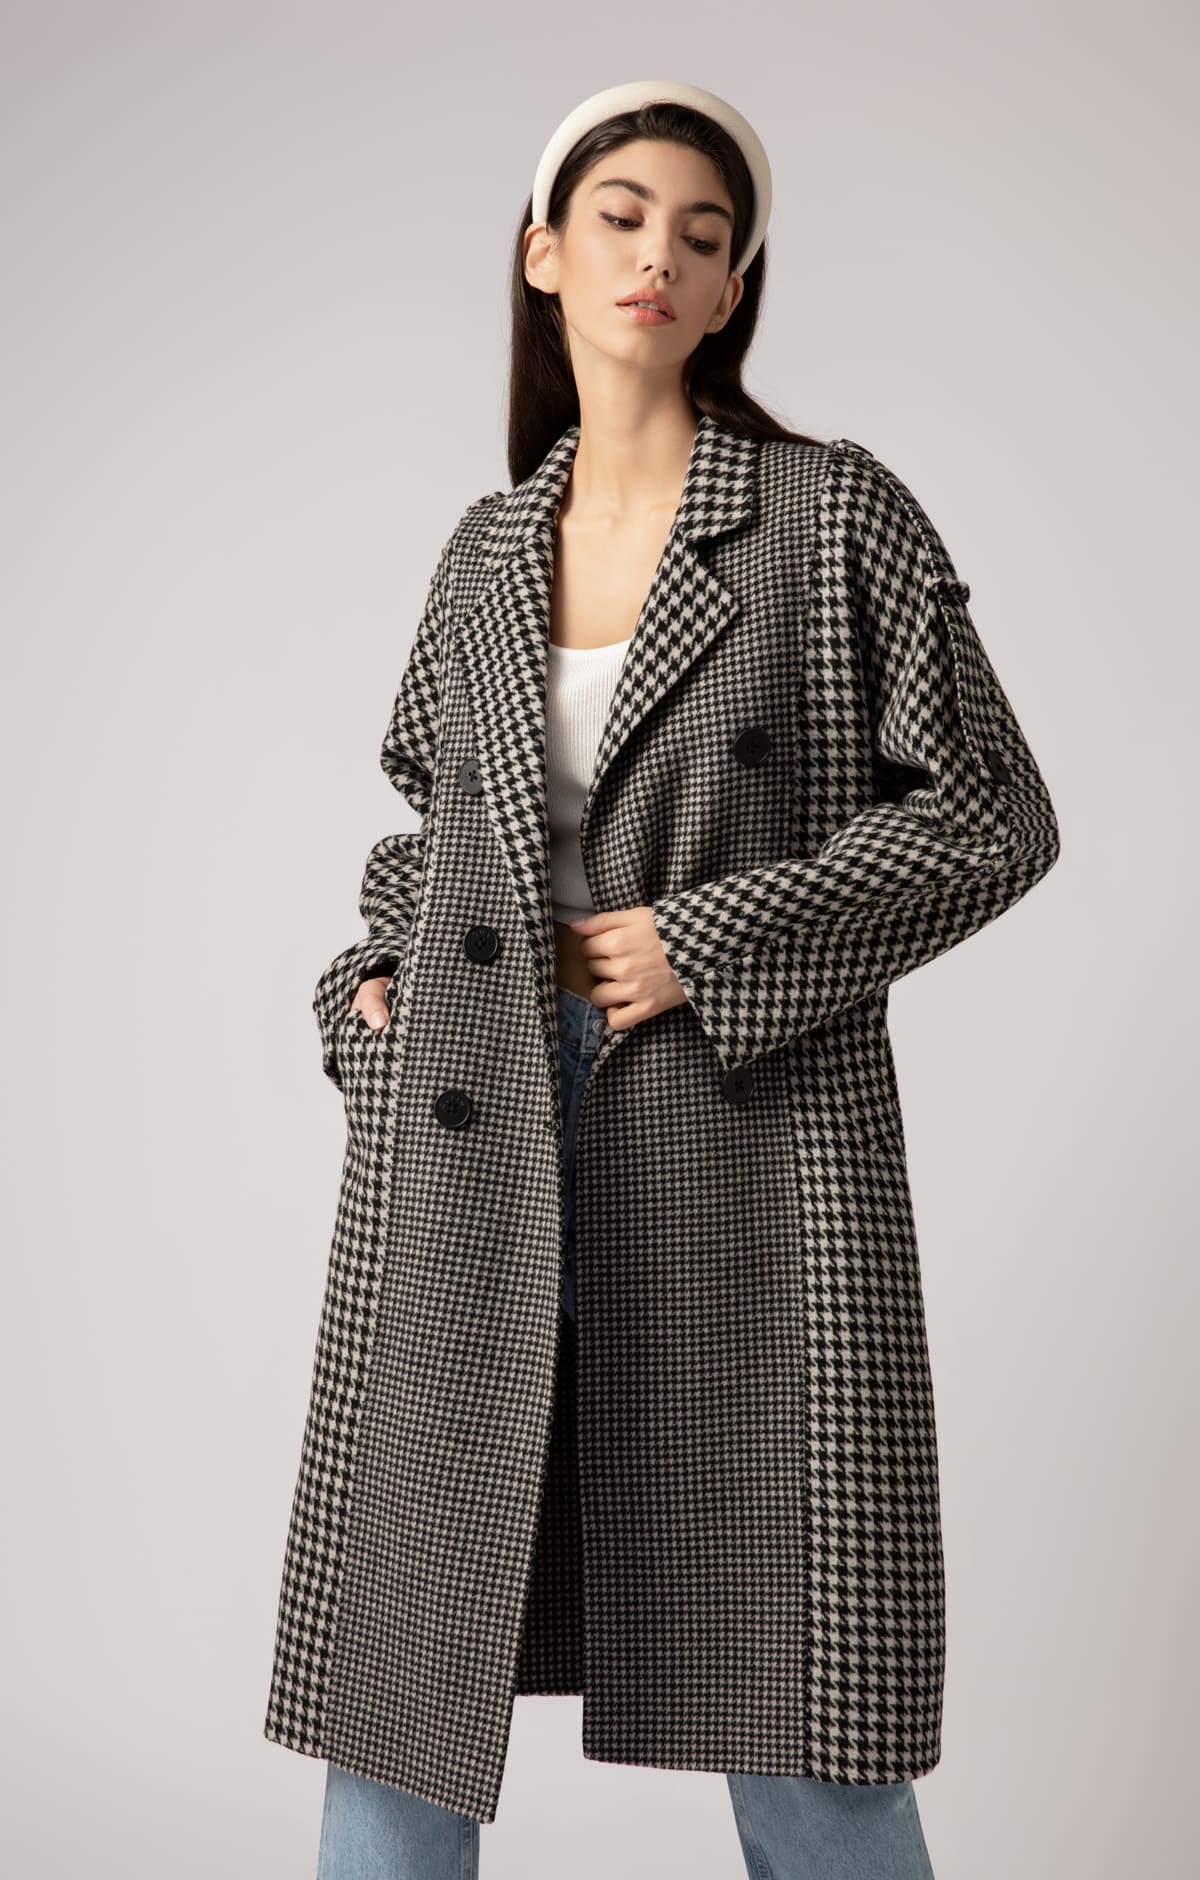 Stepan - Black and White Patchwork Coat - By Quaint